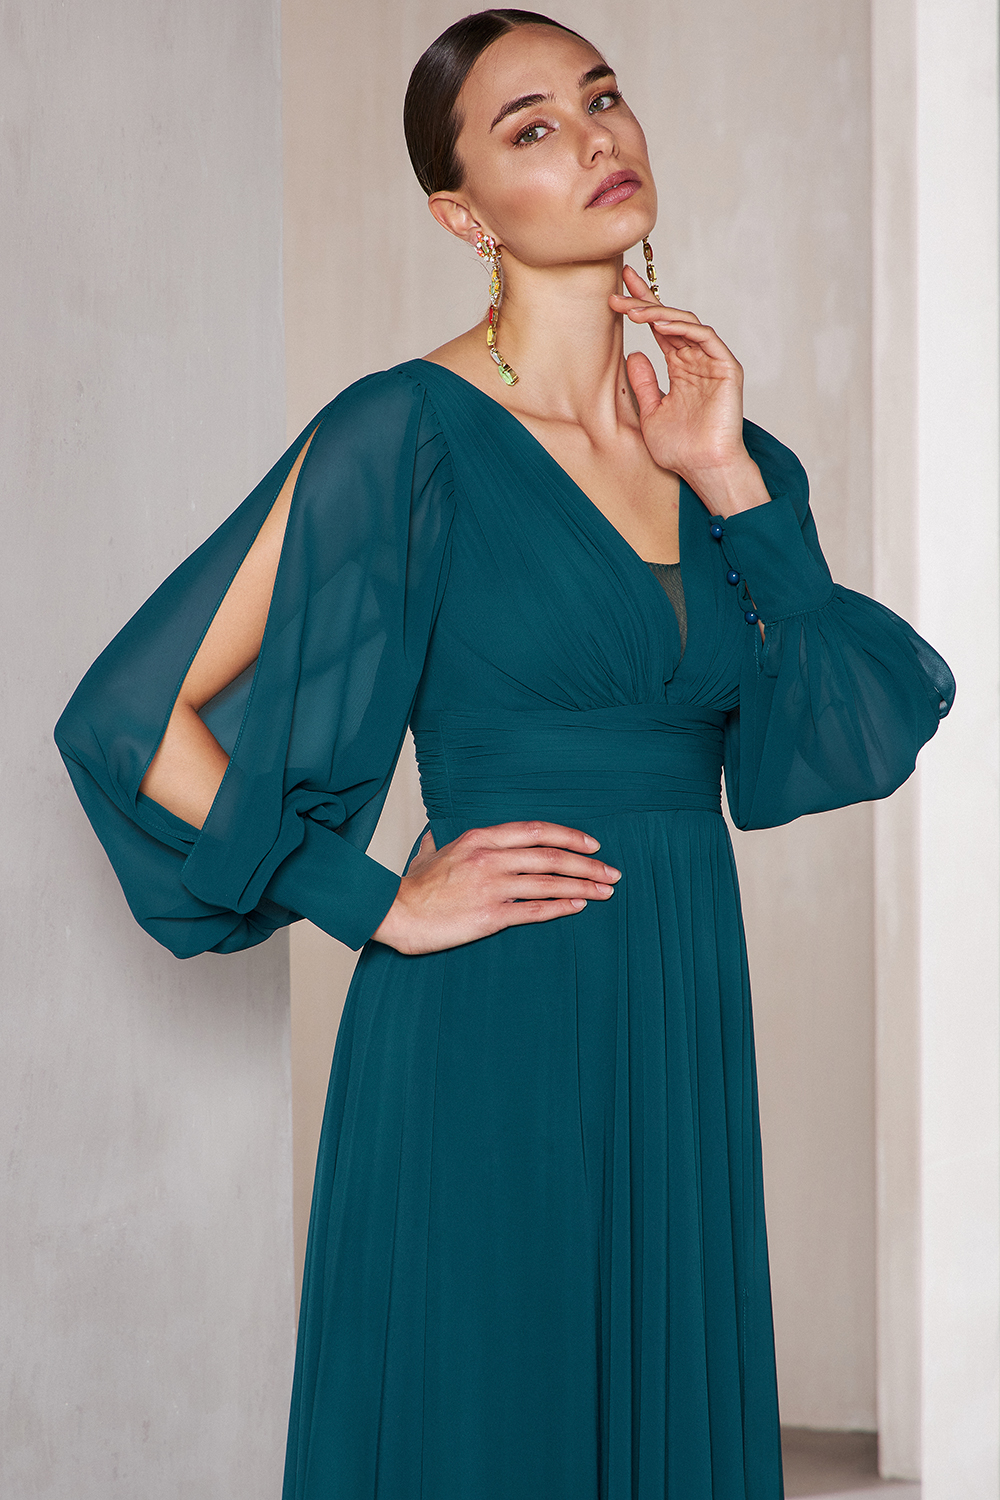 Classic Dresses / Long cocktail dress with chiffon fabric, long sleeves and opening